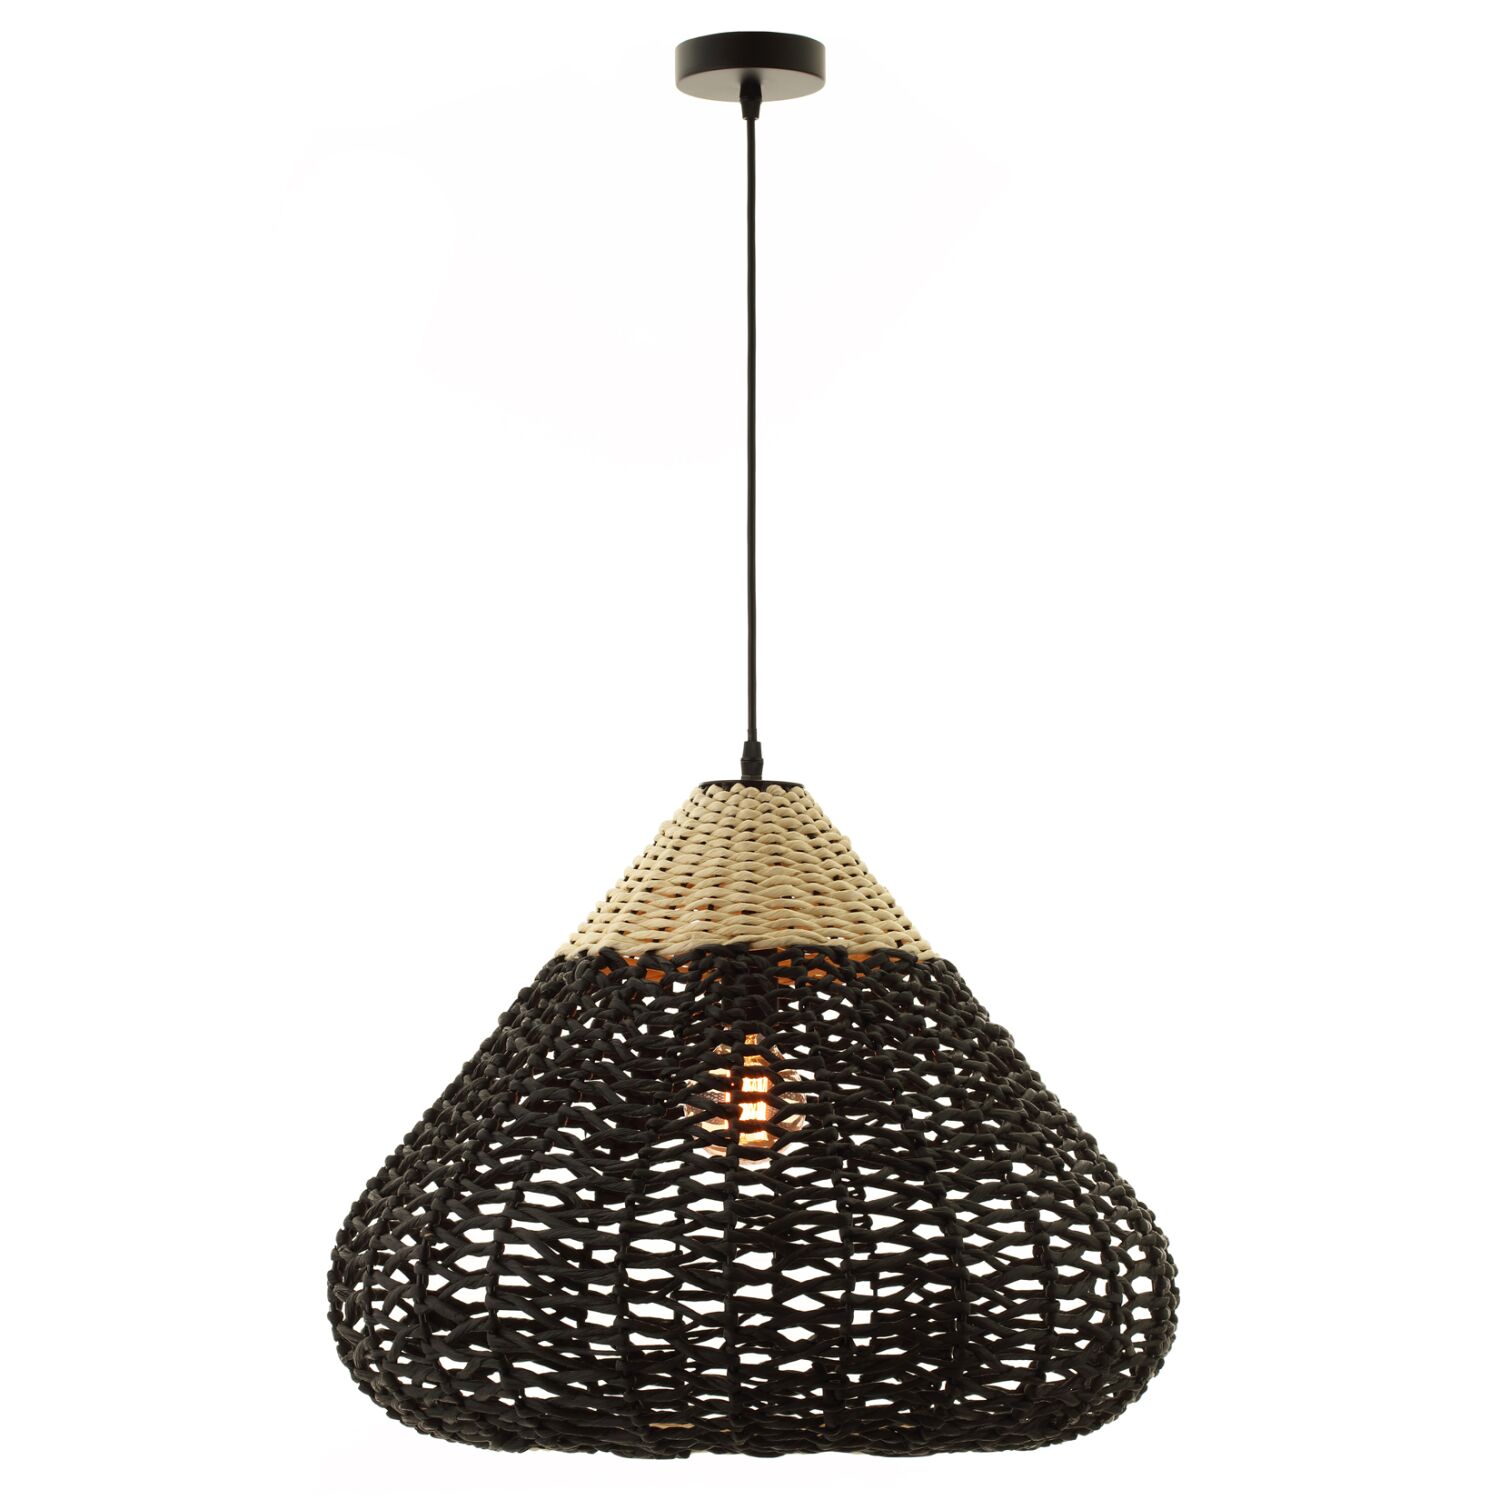 CEILING PENDANT LAMP HM4346 PAPER ROPE ΙΝ BEIGE AND BLACK Φ55,5x44Hcm.